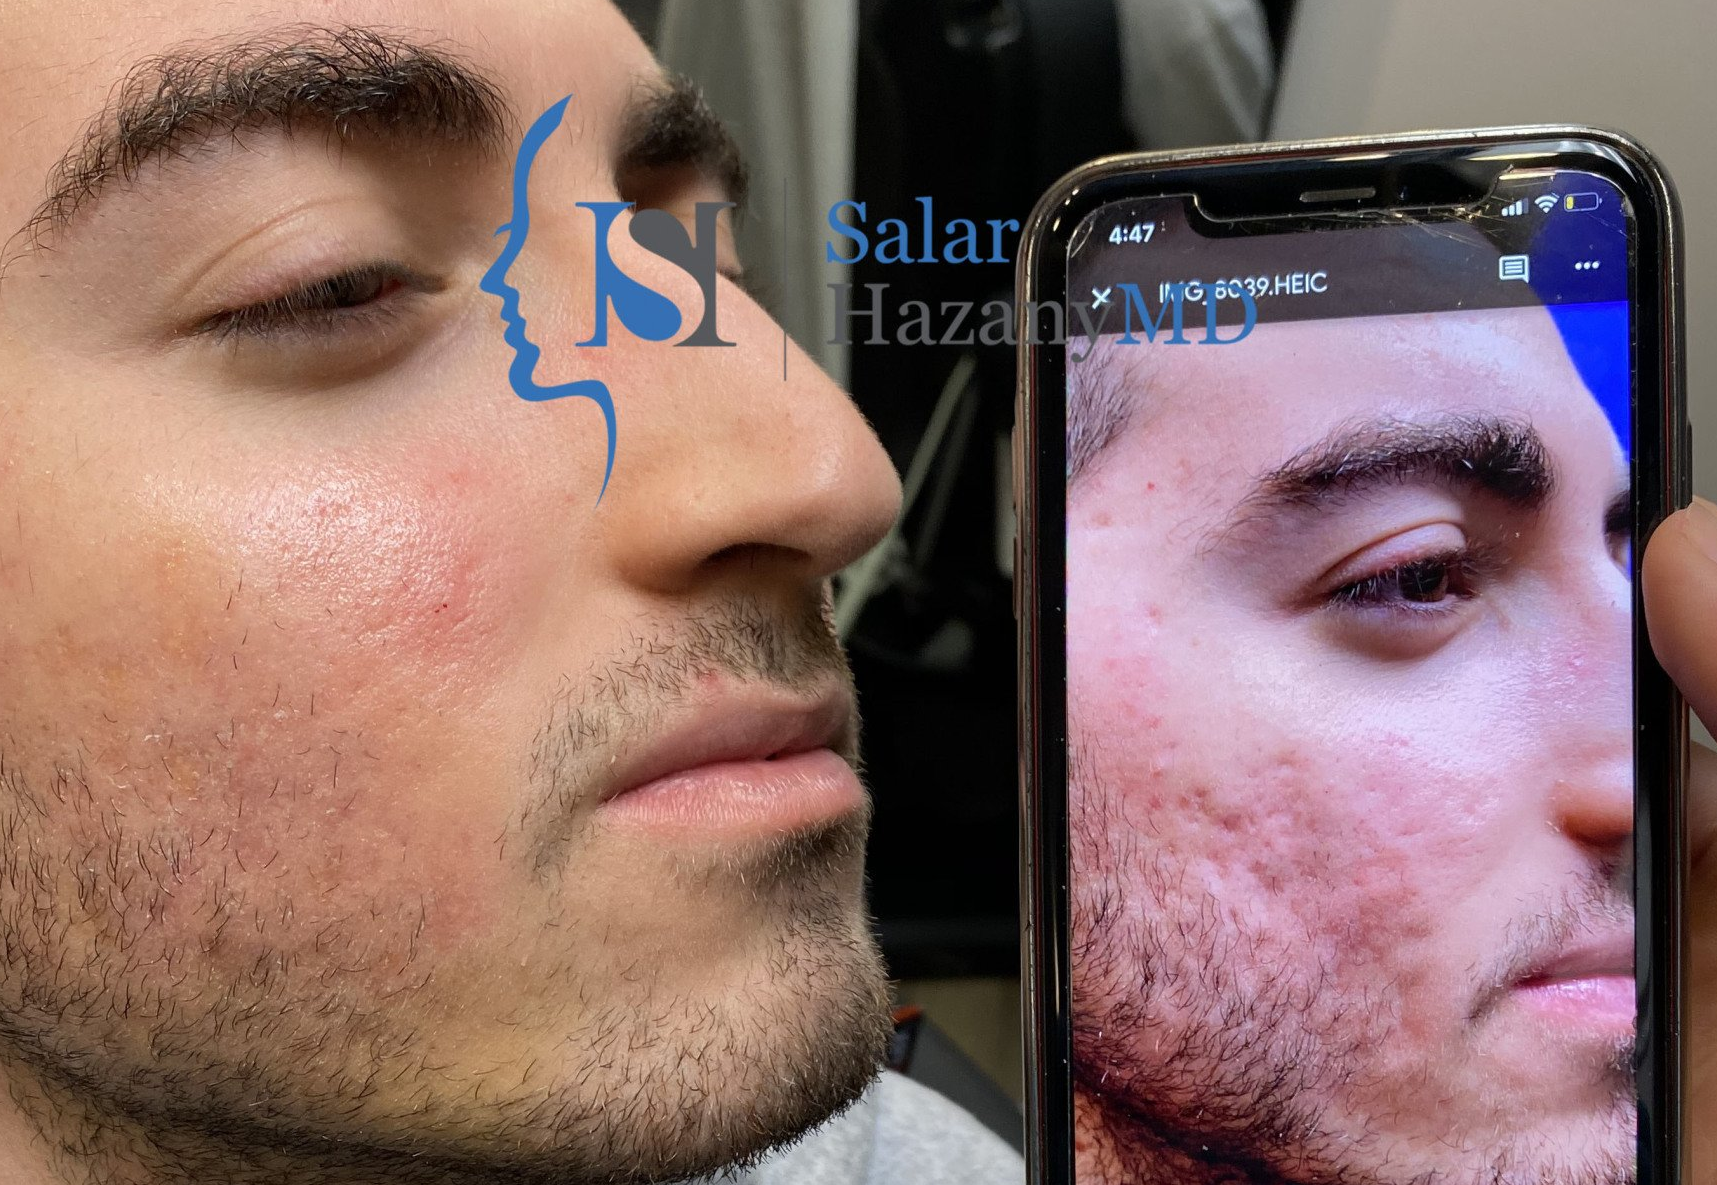 Before/After Image of Acne Scar Treatment Near the San Fernando Valley